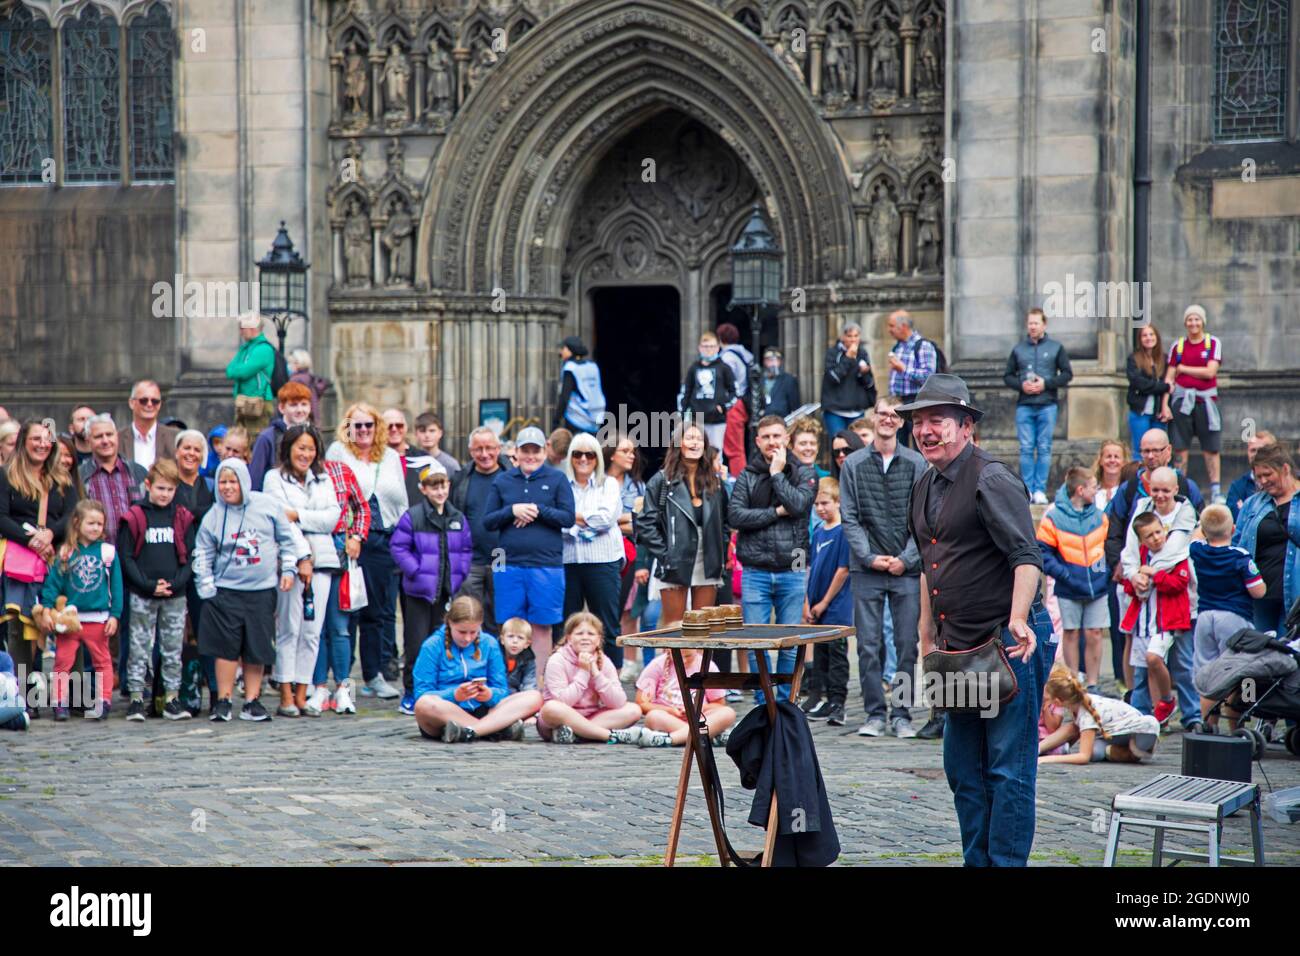 Royal Mile Edinburgh, Scotland, UK. 14th August 2021. Sun came out for the Fringe Festival, 2nd weekend for the scaled back event in the capital city. Crowds arrived but nothing like pre-covid years. Pictured: James James magician and comedian entertains the audience at West Parliamnet Square. Credit: Arch White/Alamy Live News. Stock Photo